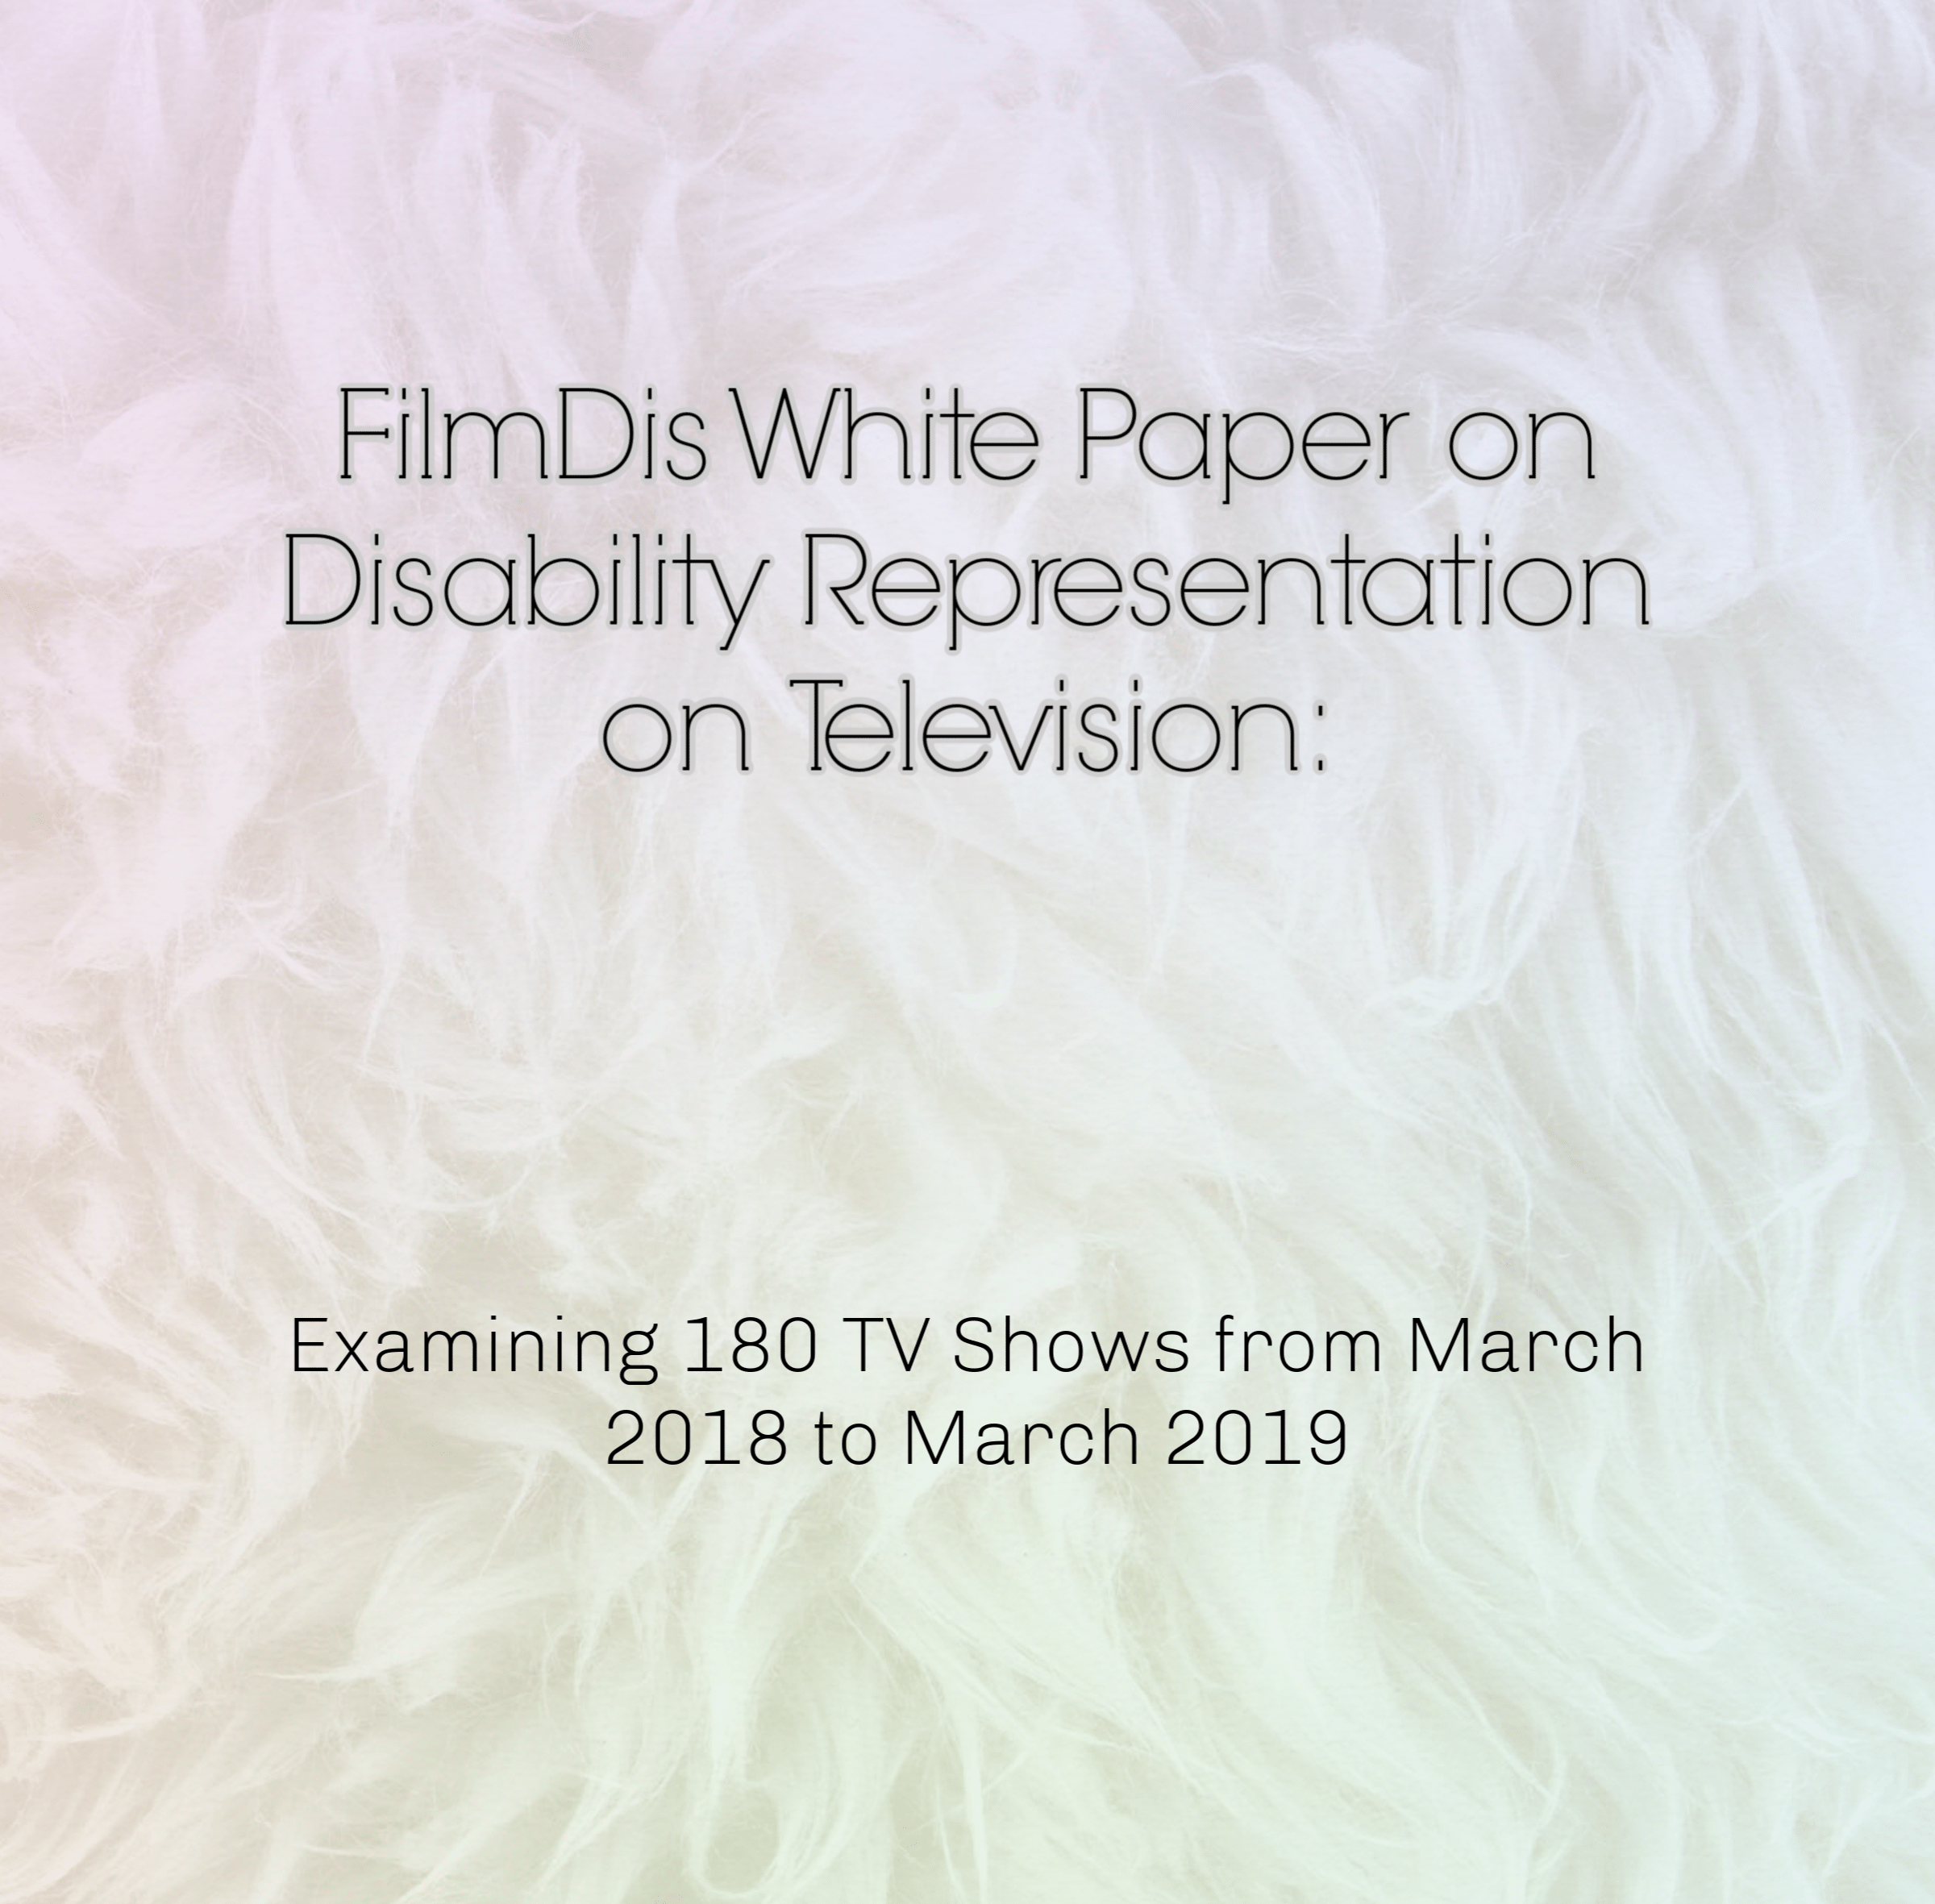 A rainbow background with natural fiber texture is behind text in black that reads, "FilmDis White Paper on Disability Representation on Television: Examining 180 TV Shows from March 2018 to March 2019"